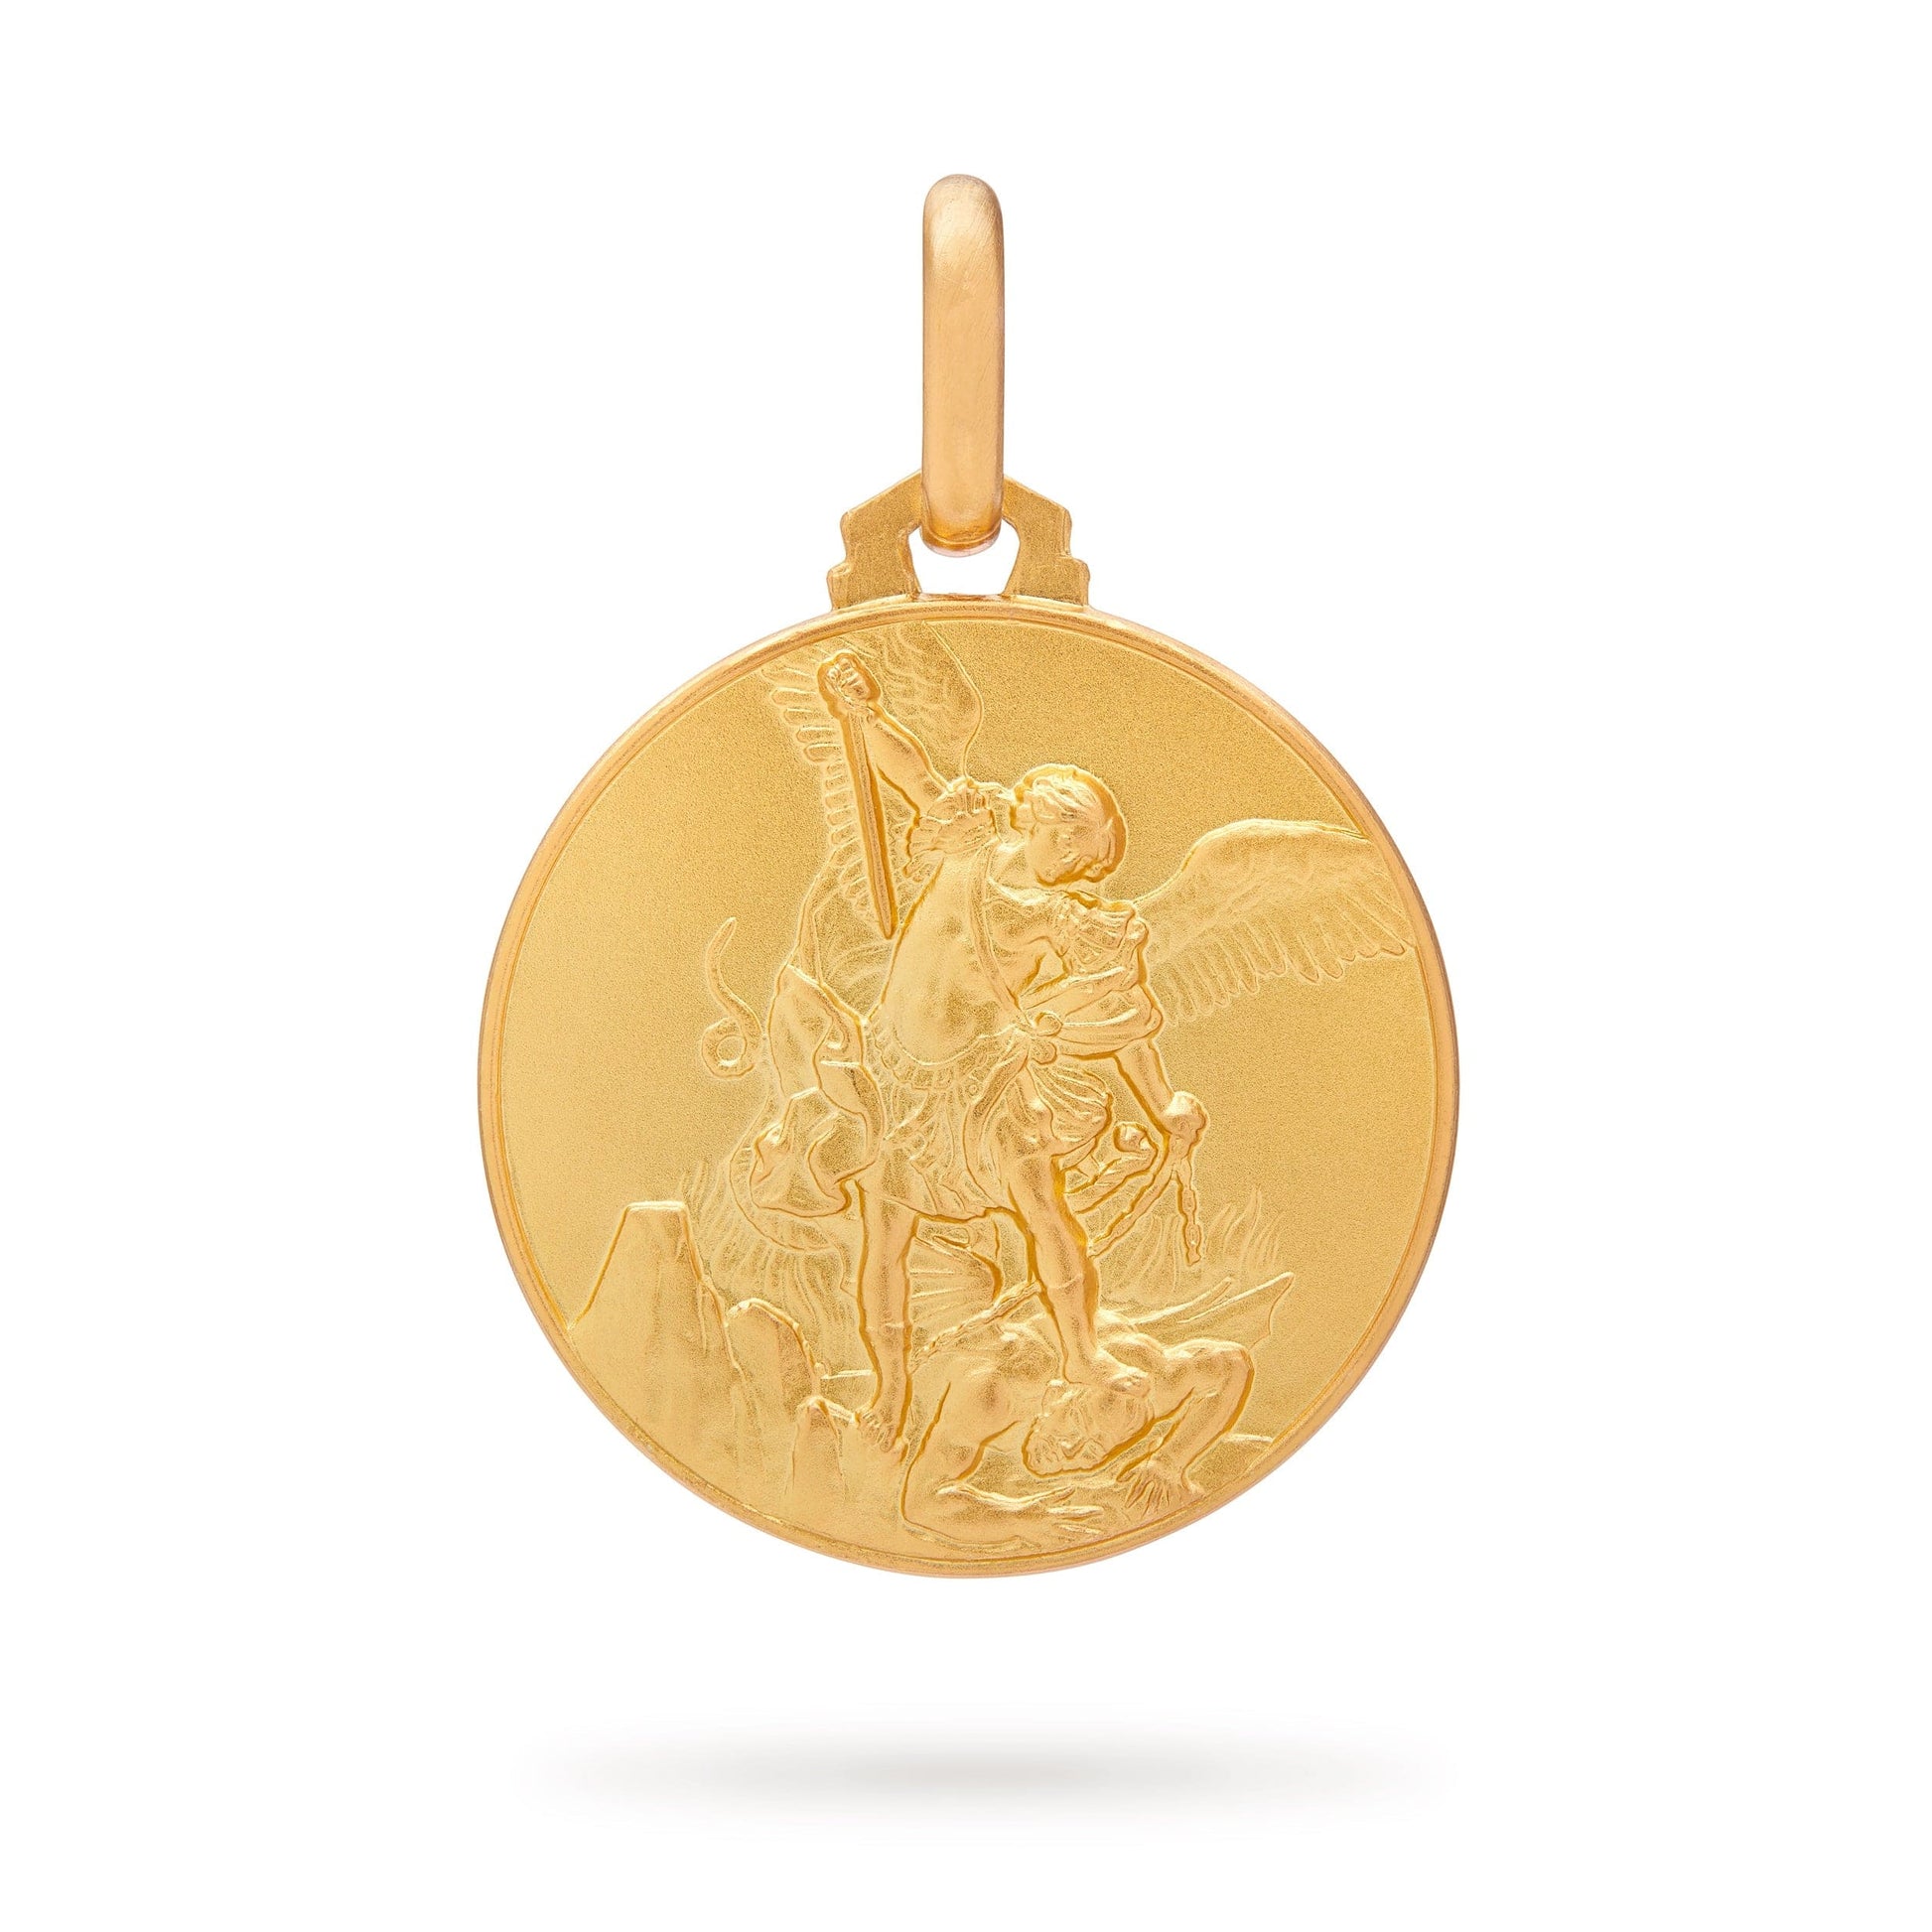 MONDO CATTOLICO Jewelry Gold medal of Saint Michael